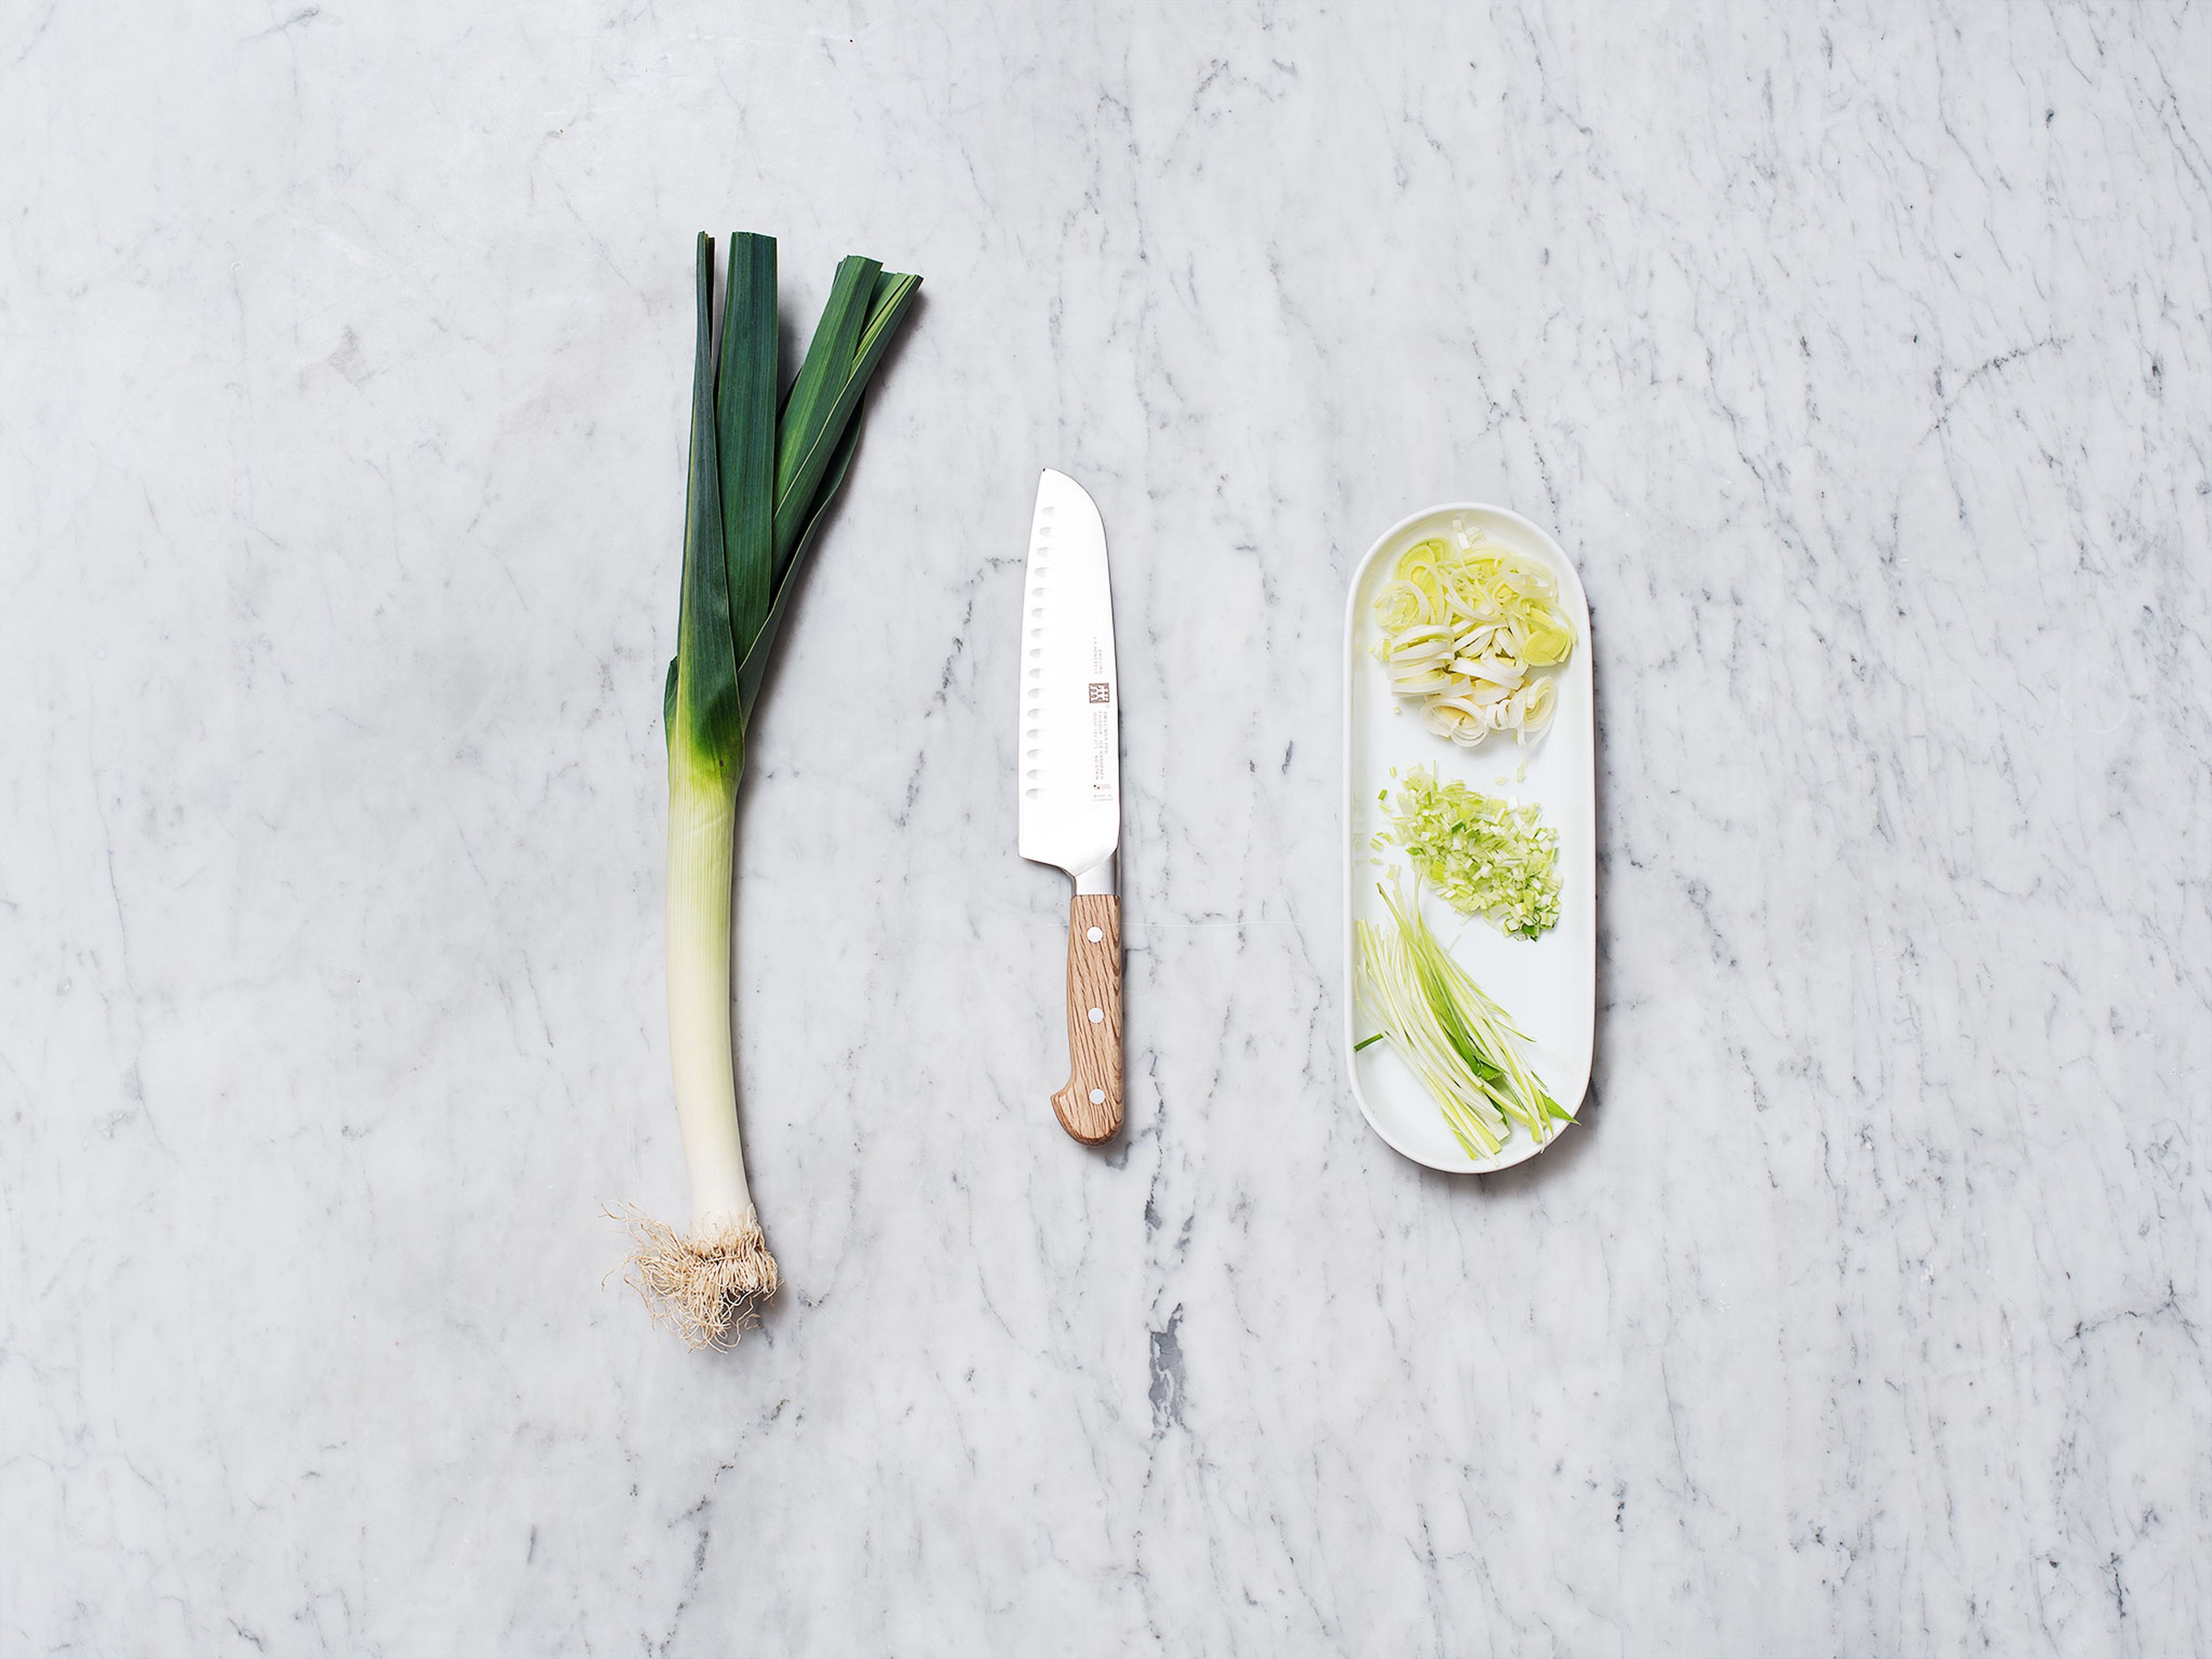 How to clean and cut leeks